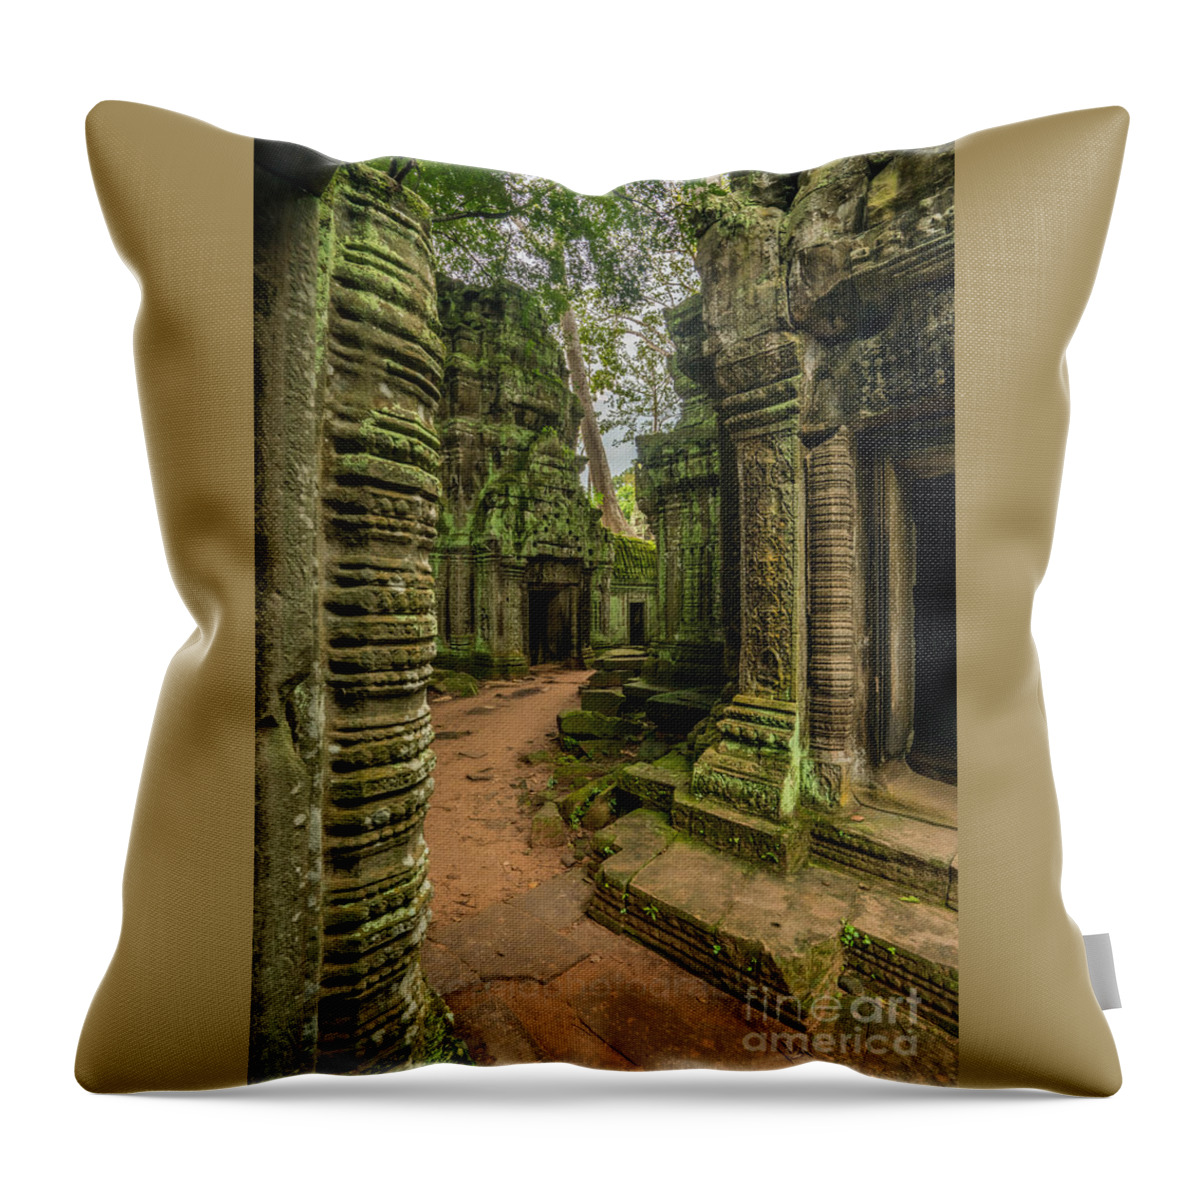 Cambodia Throw Pillow featuring the photograph Cambodia Ta Phrom Ruins by Mike Reid